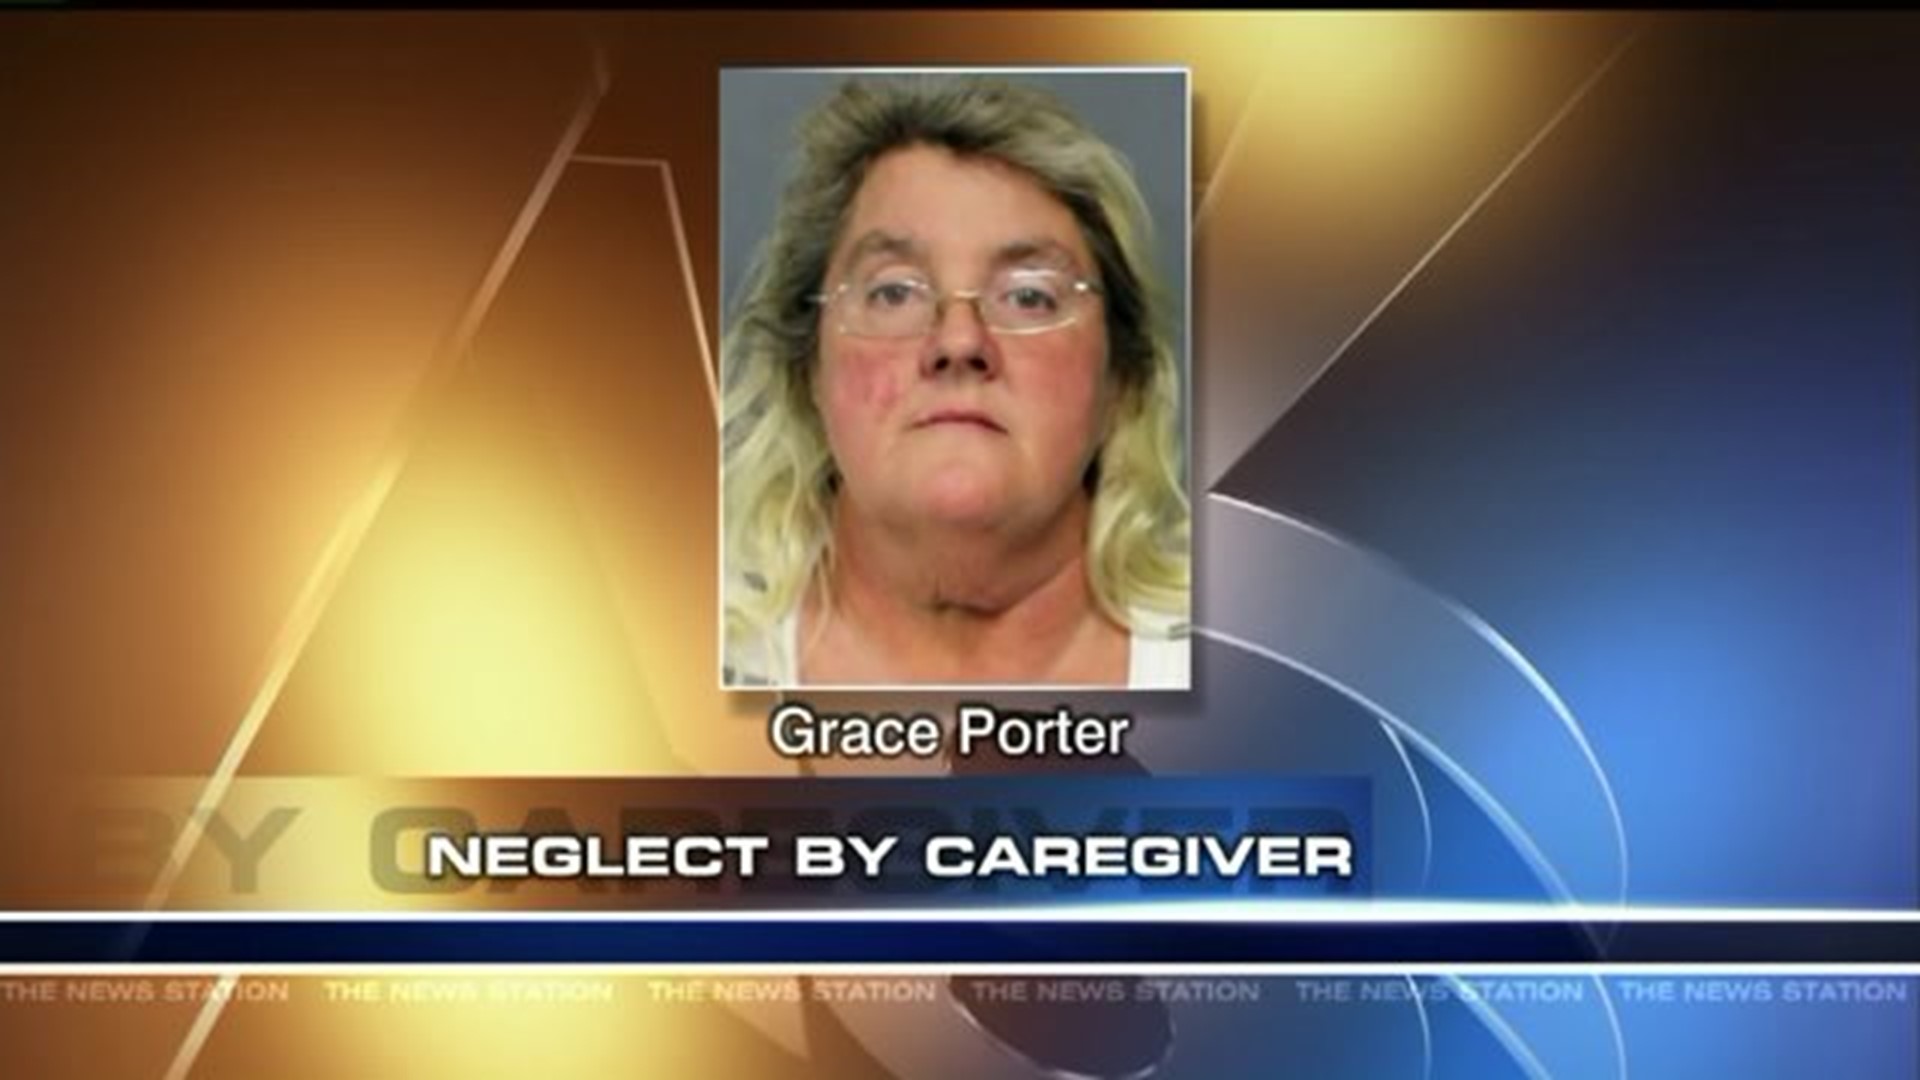 Caregiver Charged For Neglecting Disabled Woman